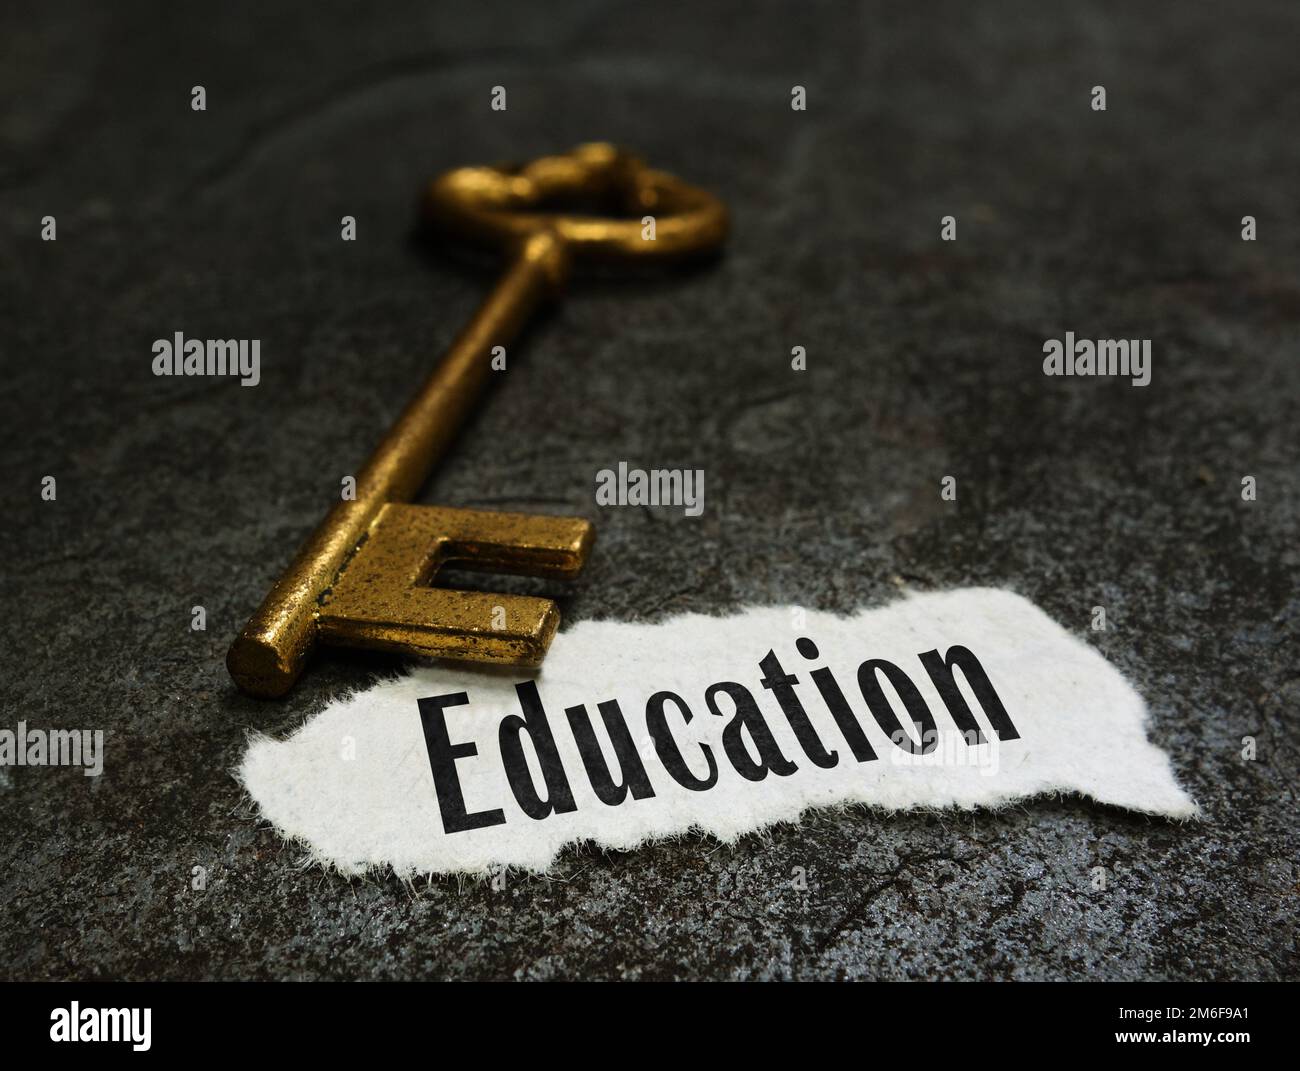 Education message with gold key Stock Photo